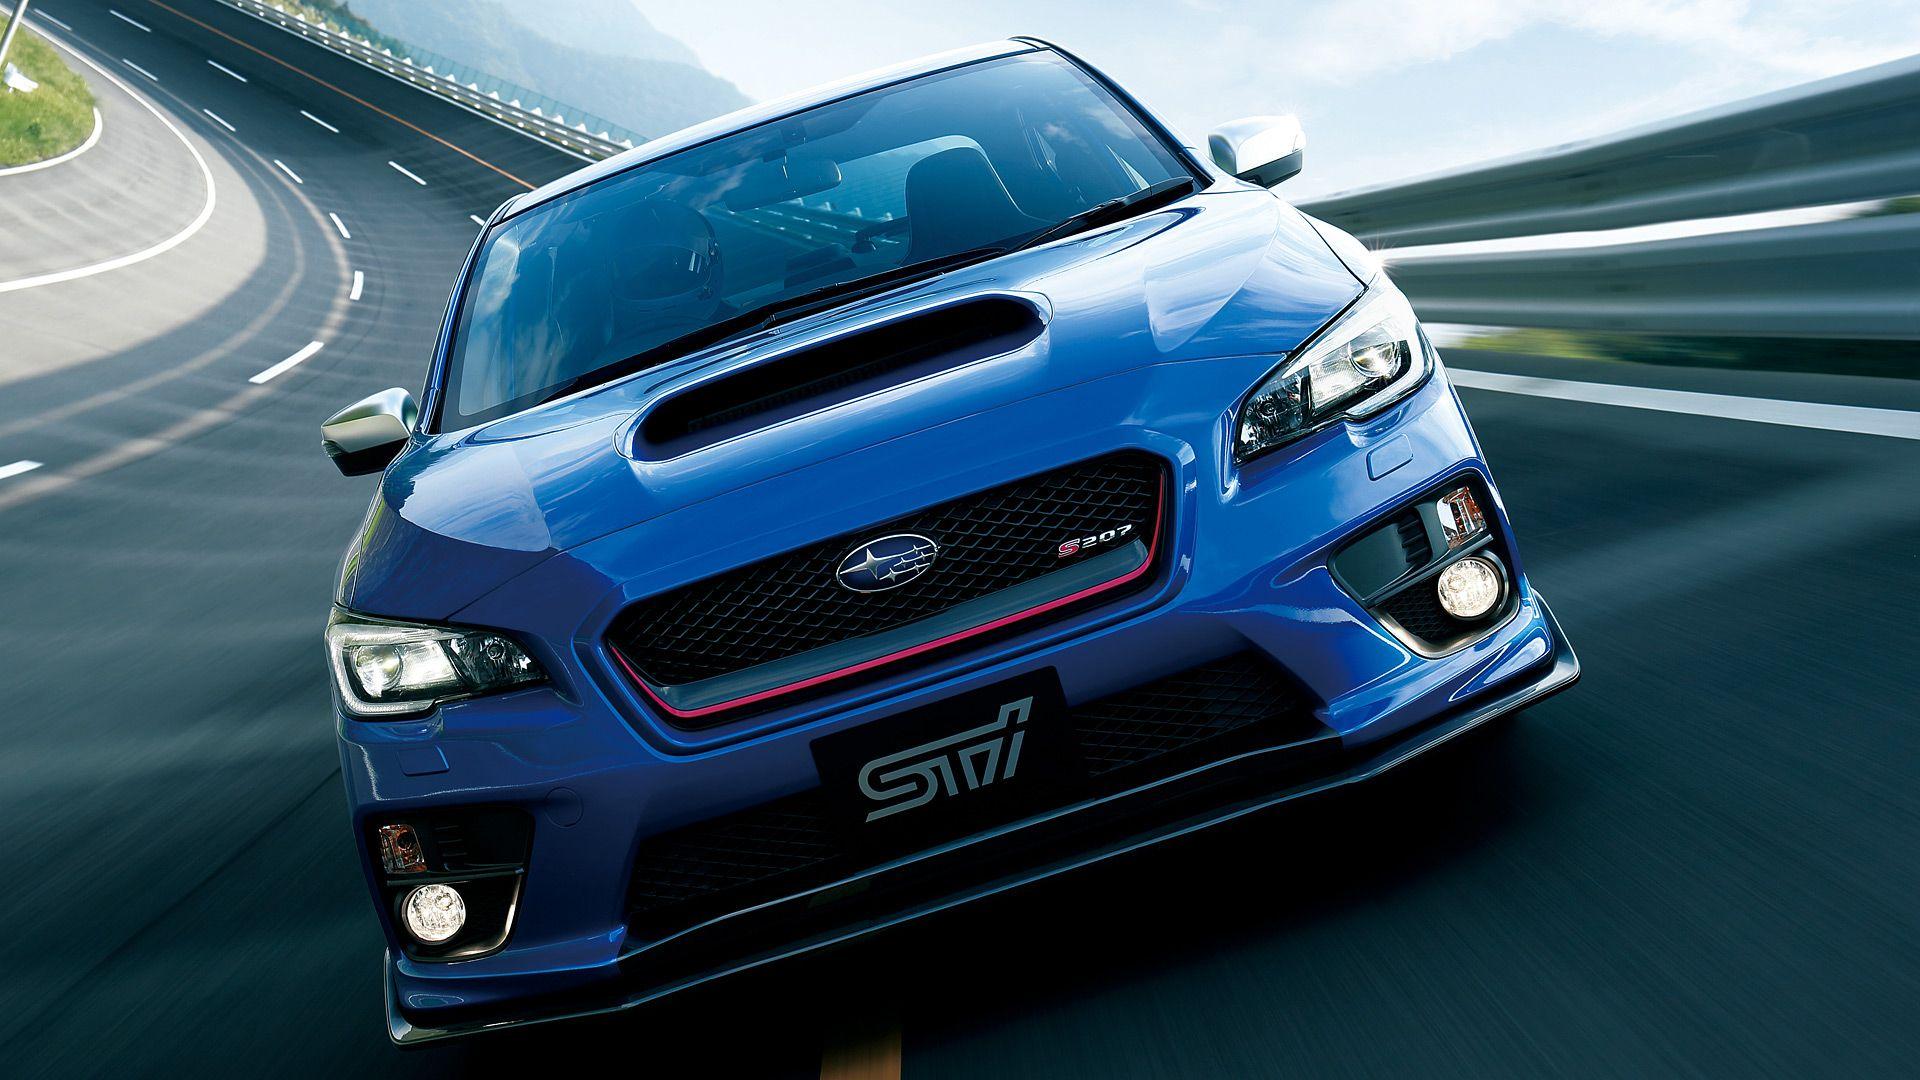 2016 Subaru Wrx Wallpapers HD Photos, Wallpapers and other Image